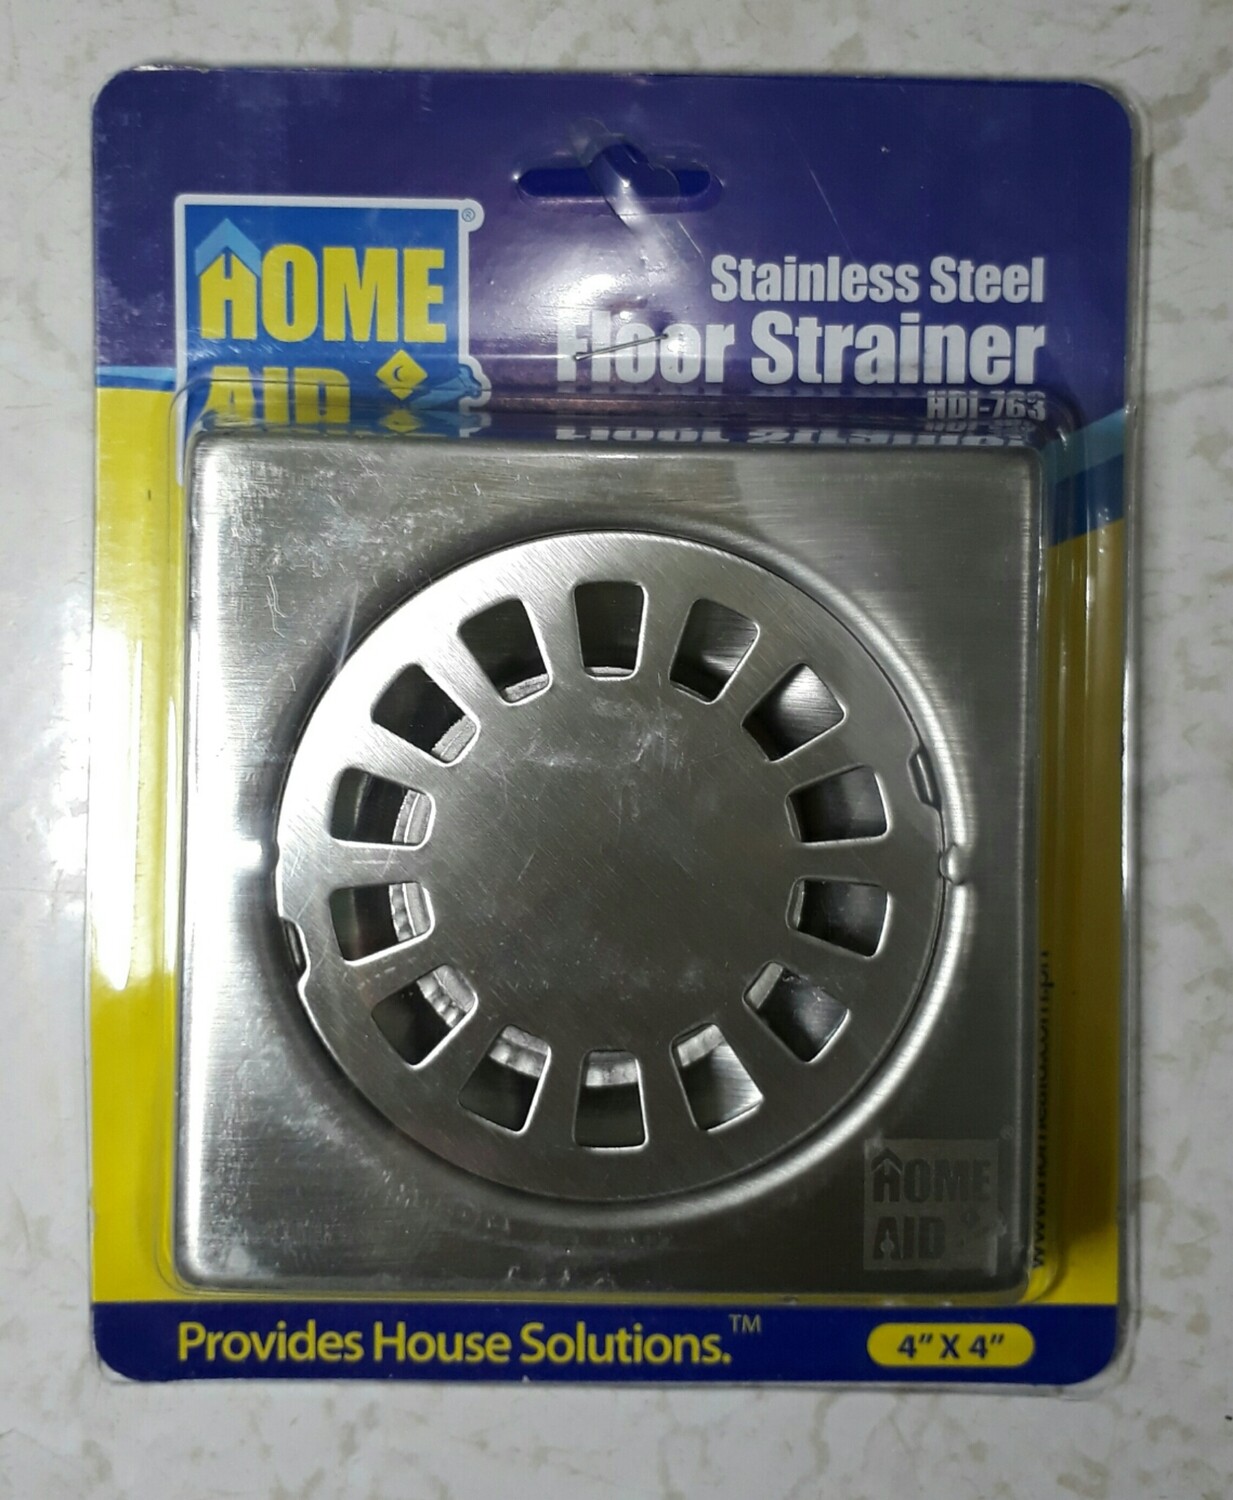 Homeaid Stainless Steel Anti Odor/Pest FLOOR STRAINER 4" x 4" HDI-763